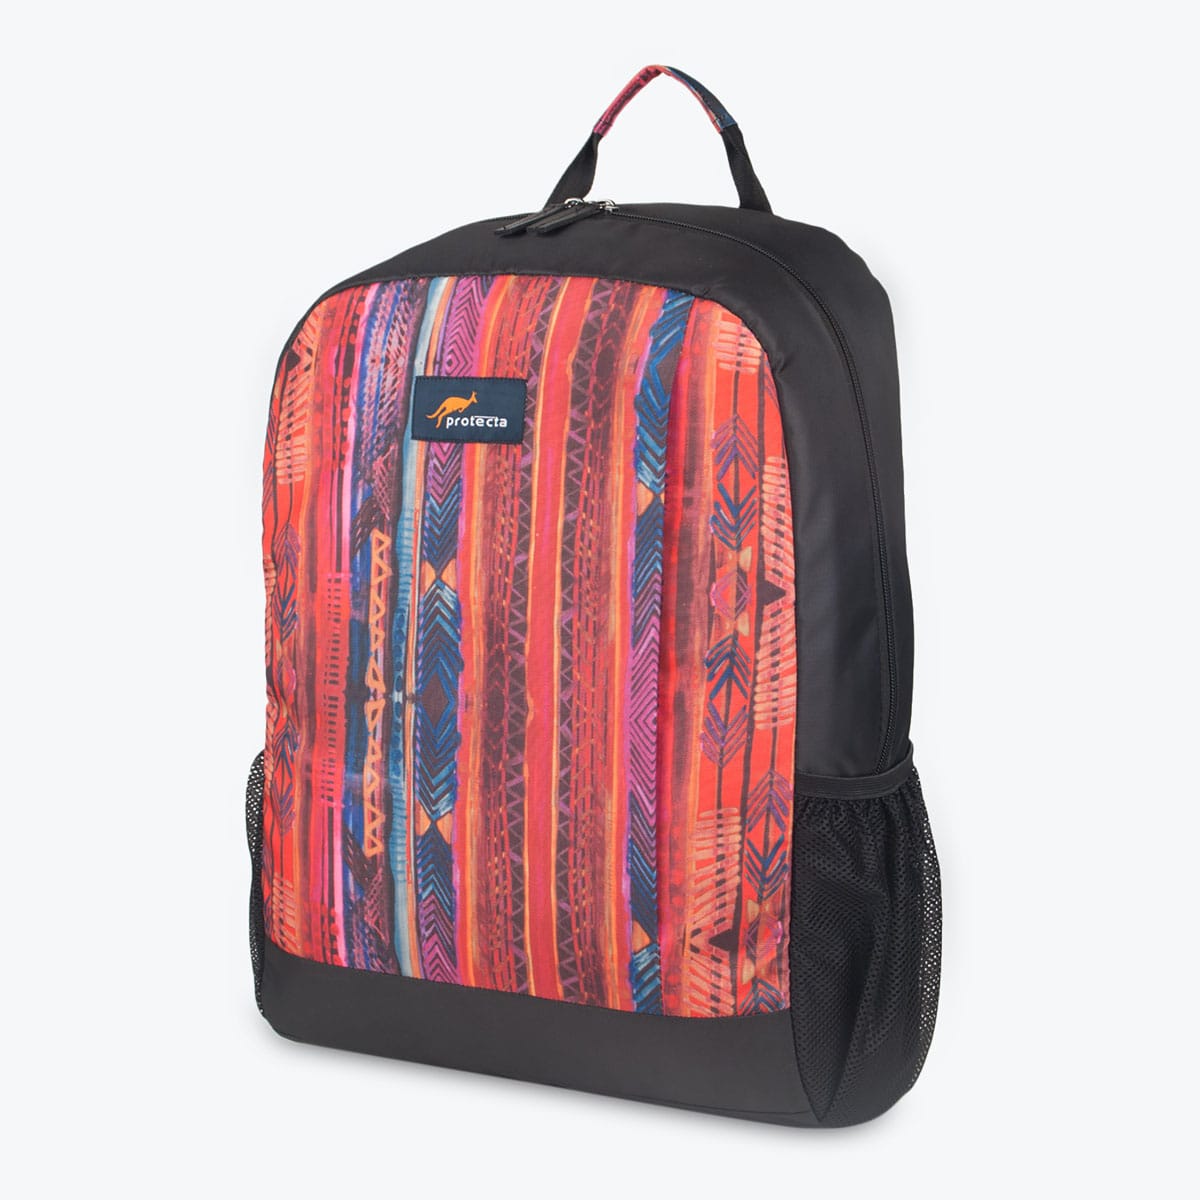 Red Vine | Protecta Surprise Element Laptop Backpack-Main